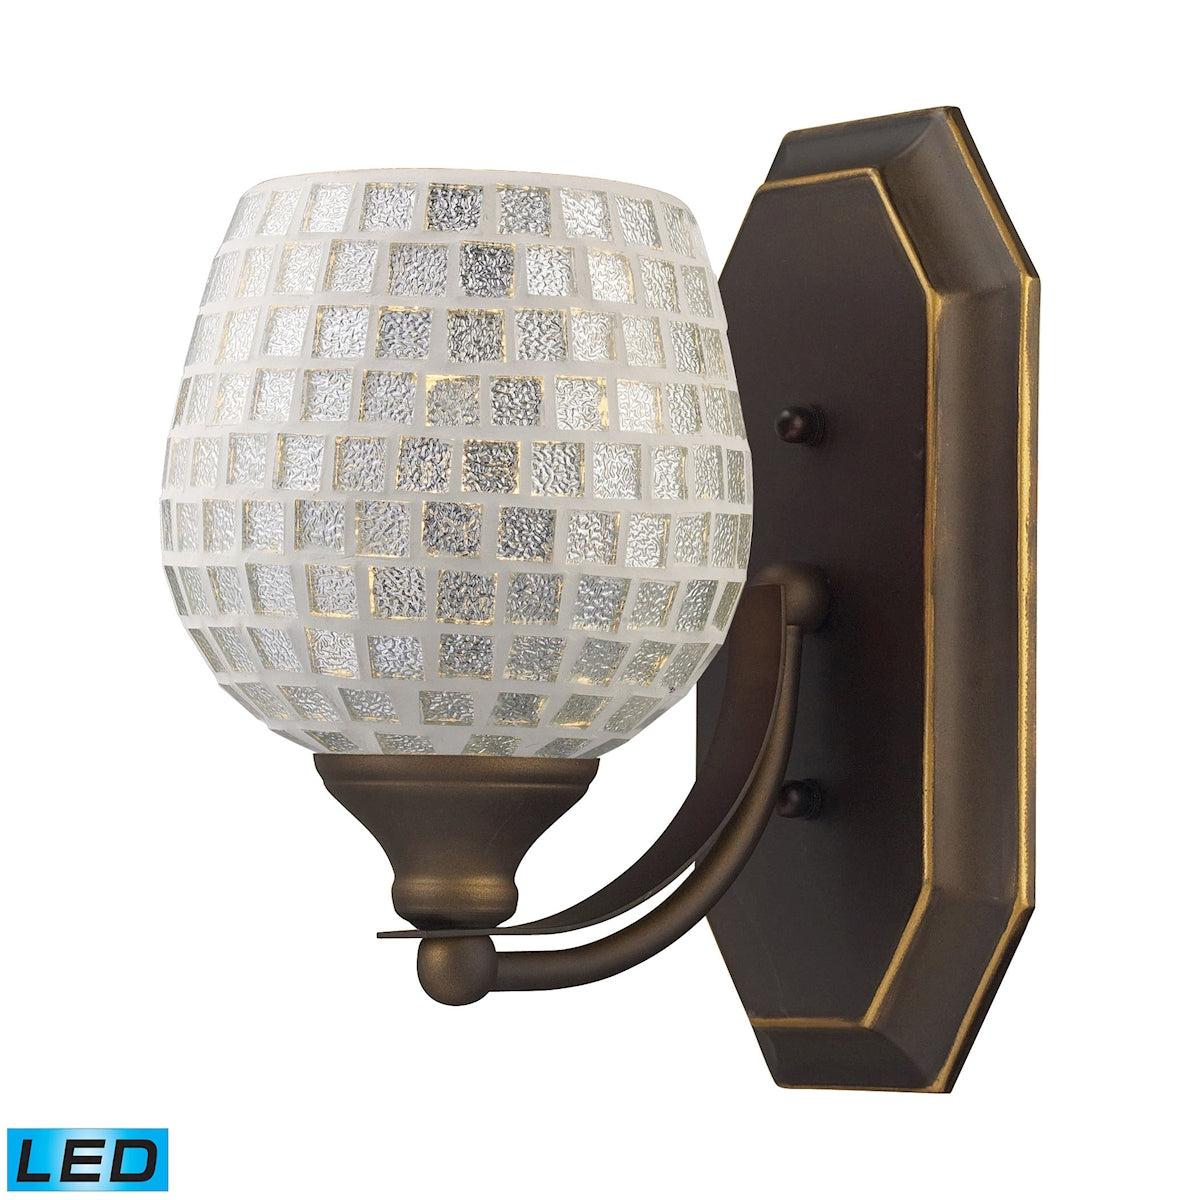 Mix-N-Match Vanity 1-Light Wall Lamp in Aged Bronze with Silver Glass - Includes LED Bulb